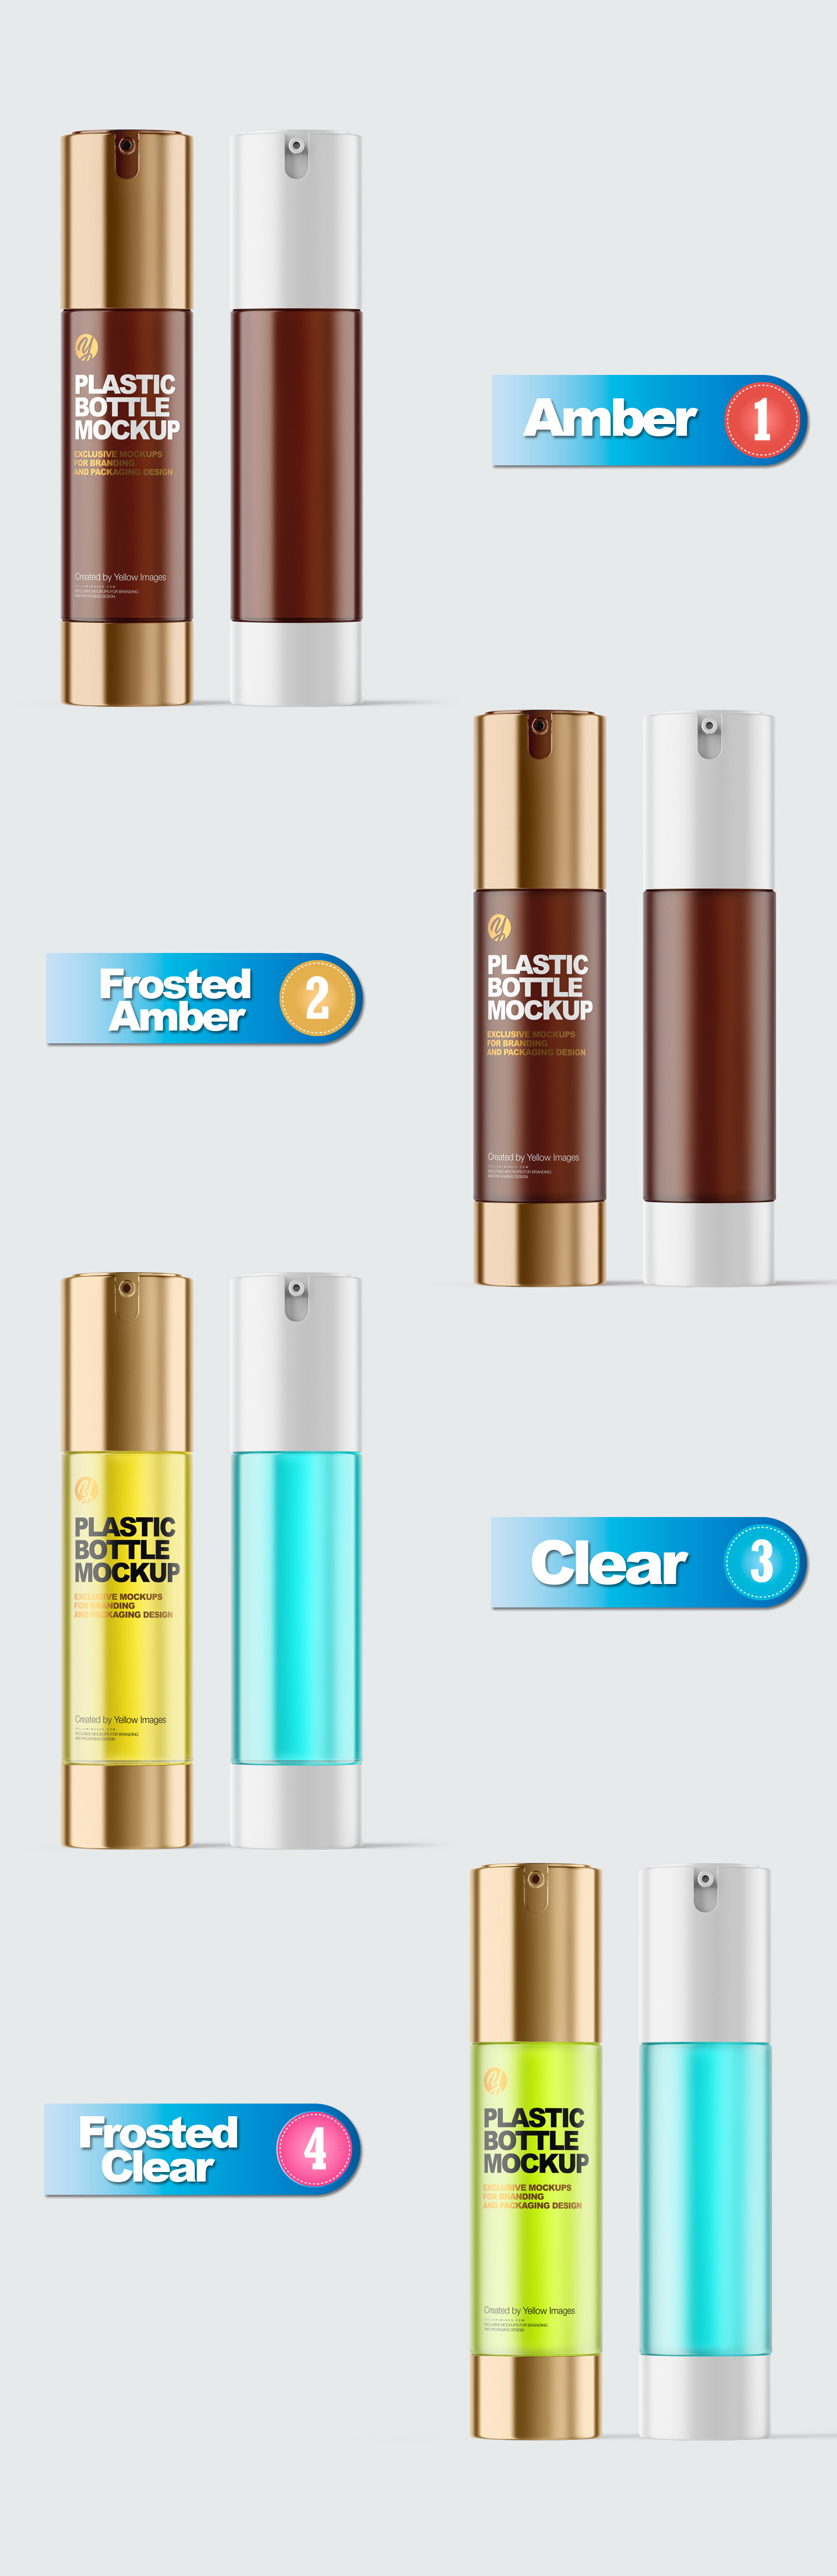 Download Airless Cosmetic Bottles Mockups On Behance Yellowimages Mockups